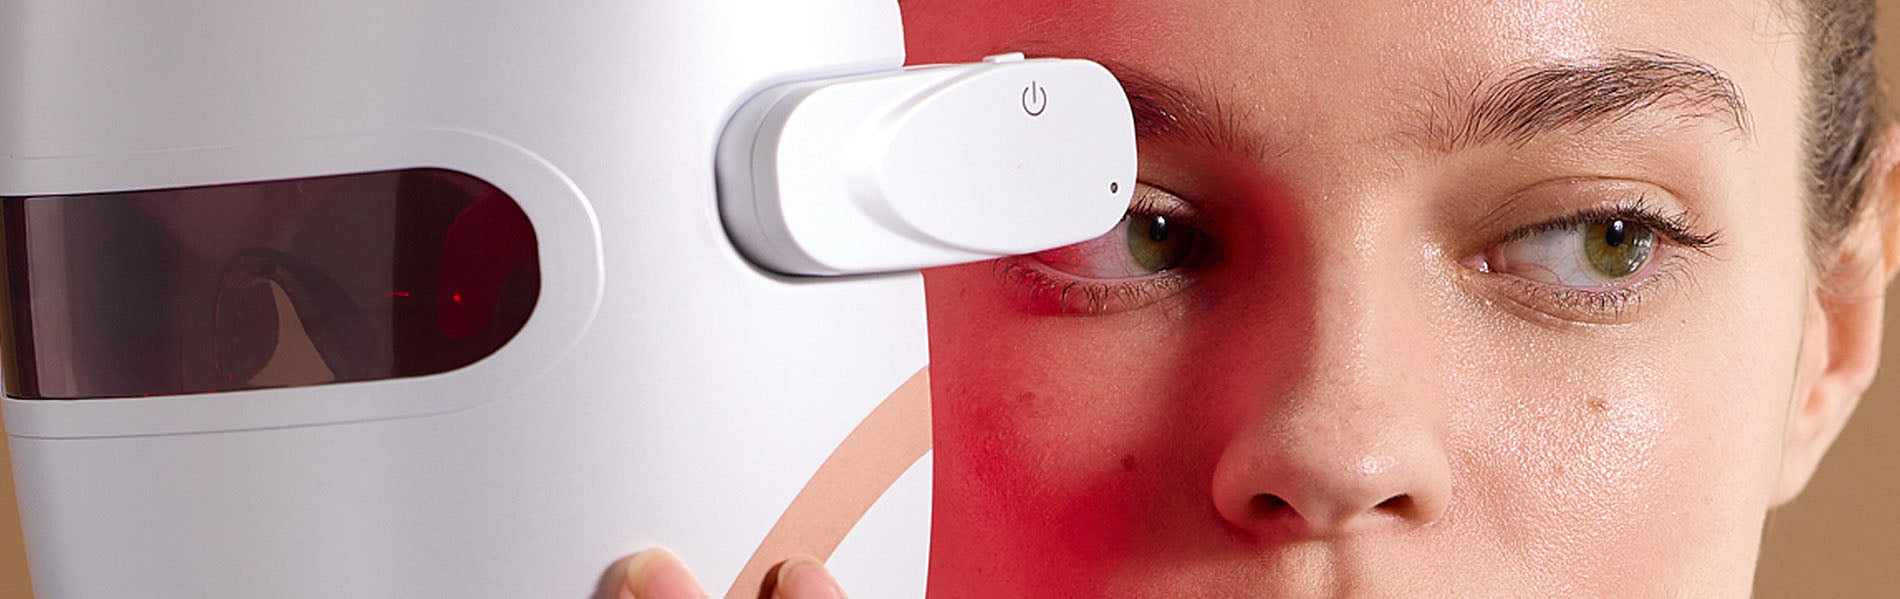 Does FDA Approval Matter When Choosing an LED Light Therapy Mask?